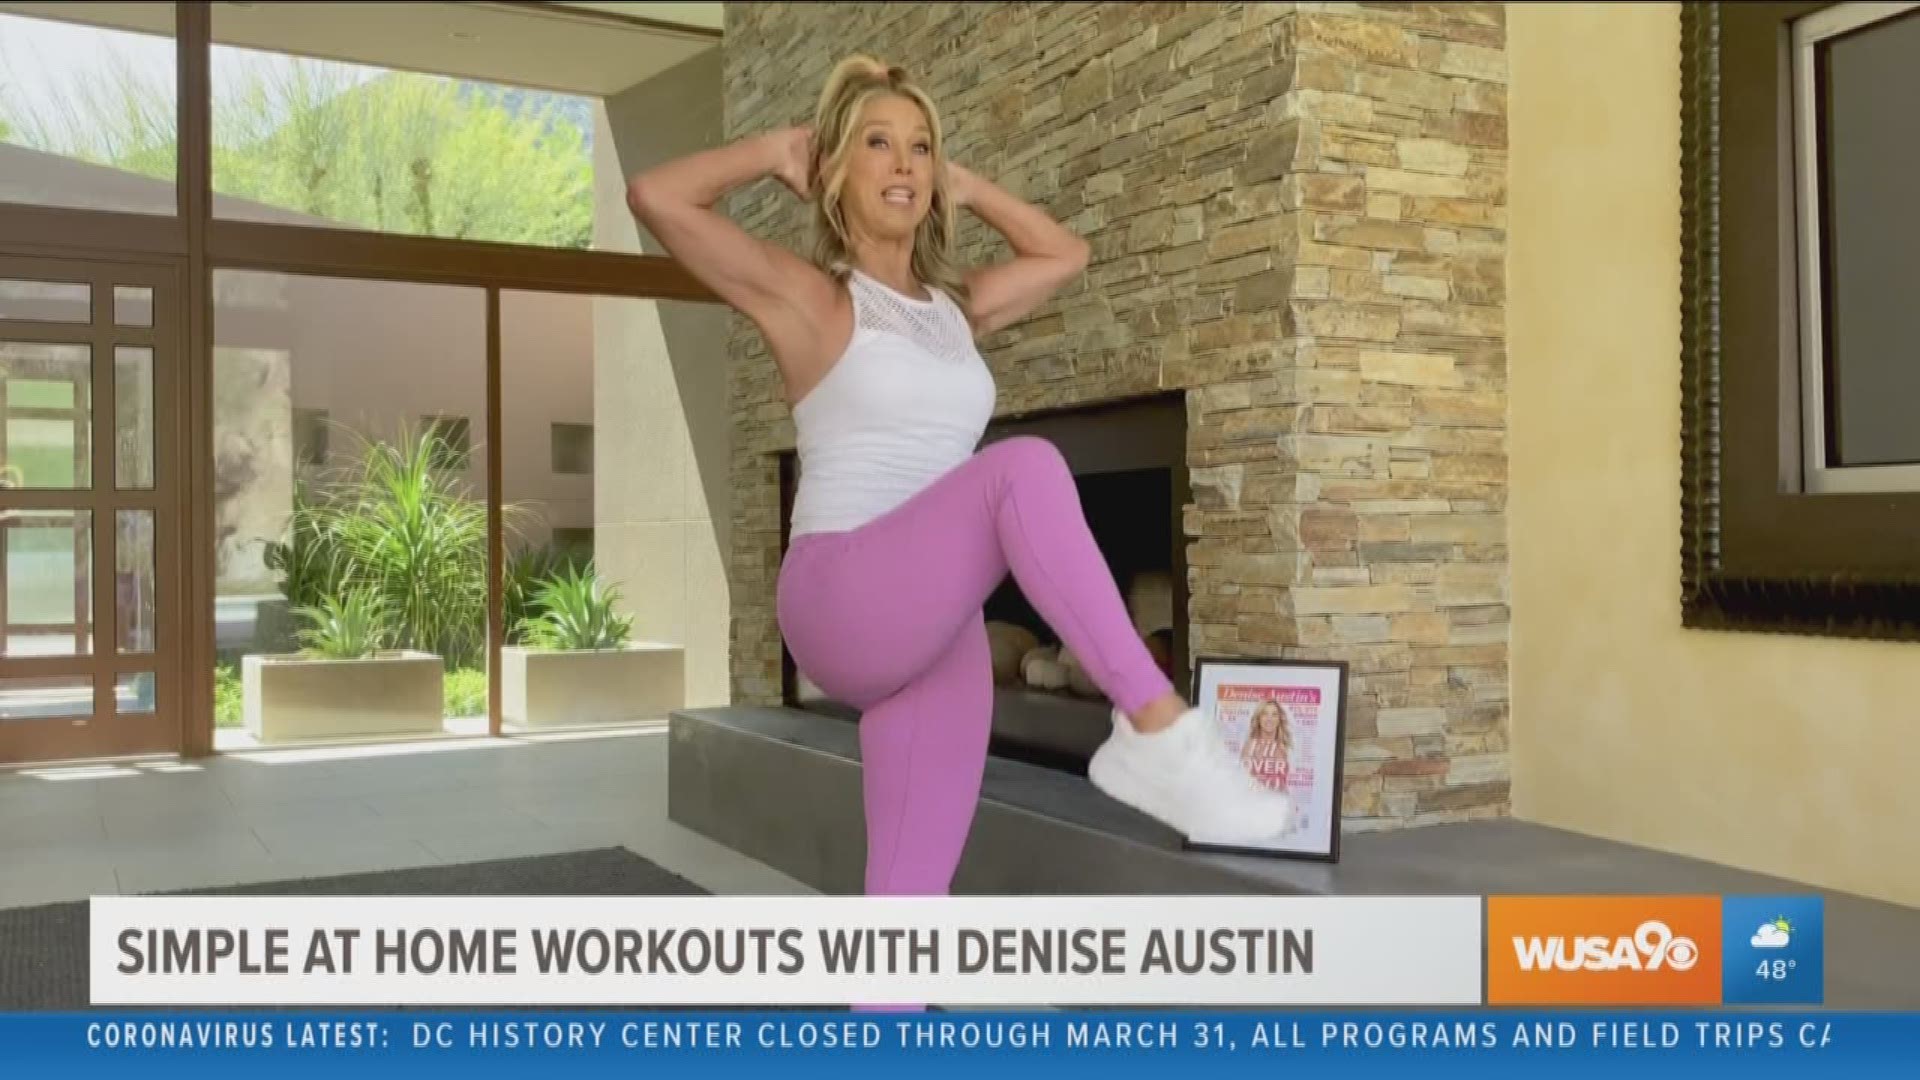 We get a simple and easy at home workout with fitness instructor and author Denise Austin.